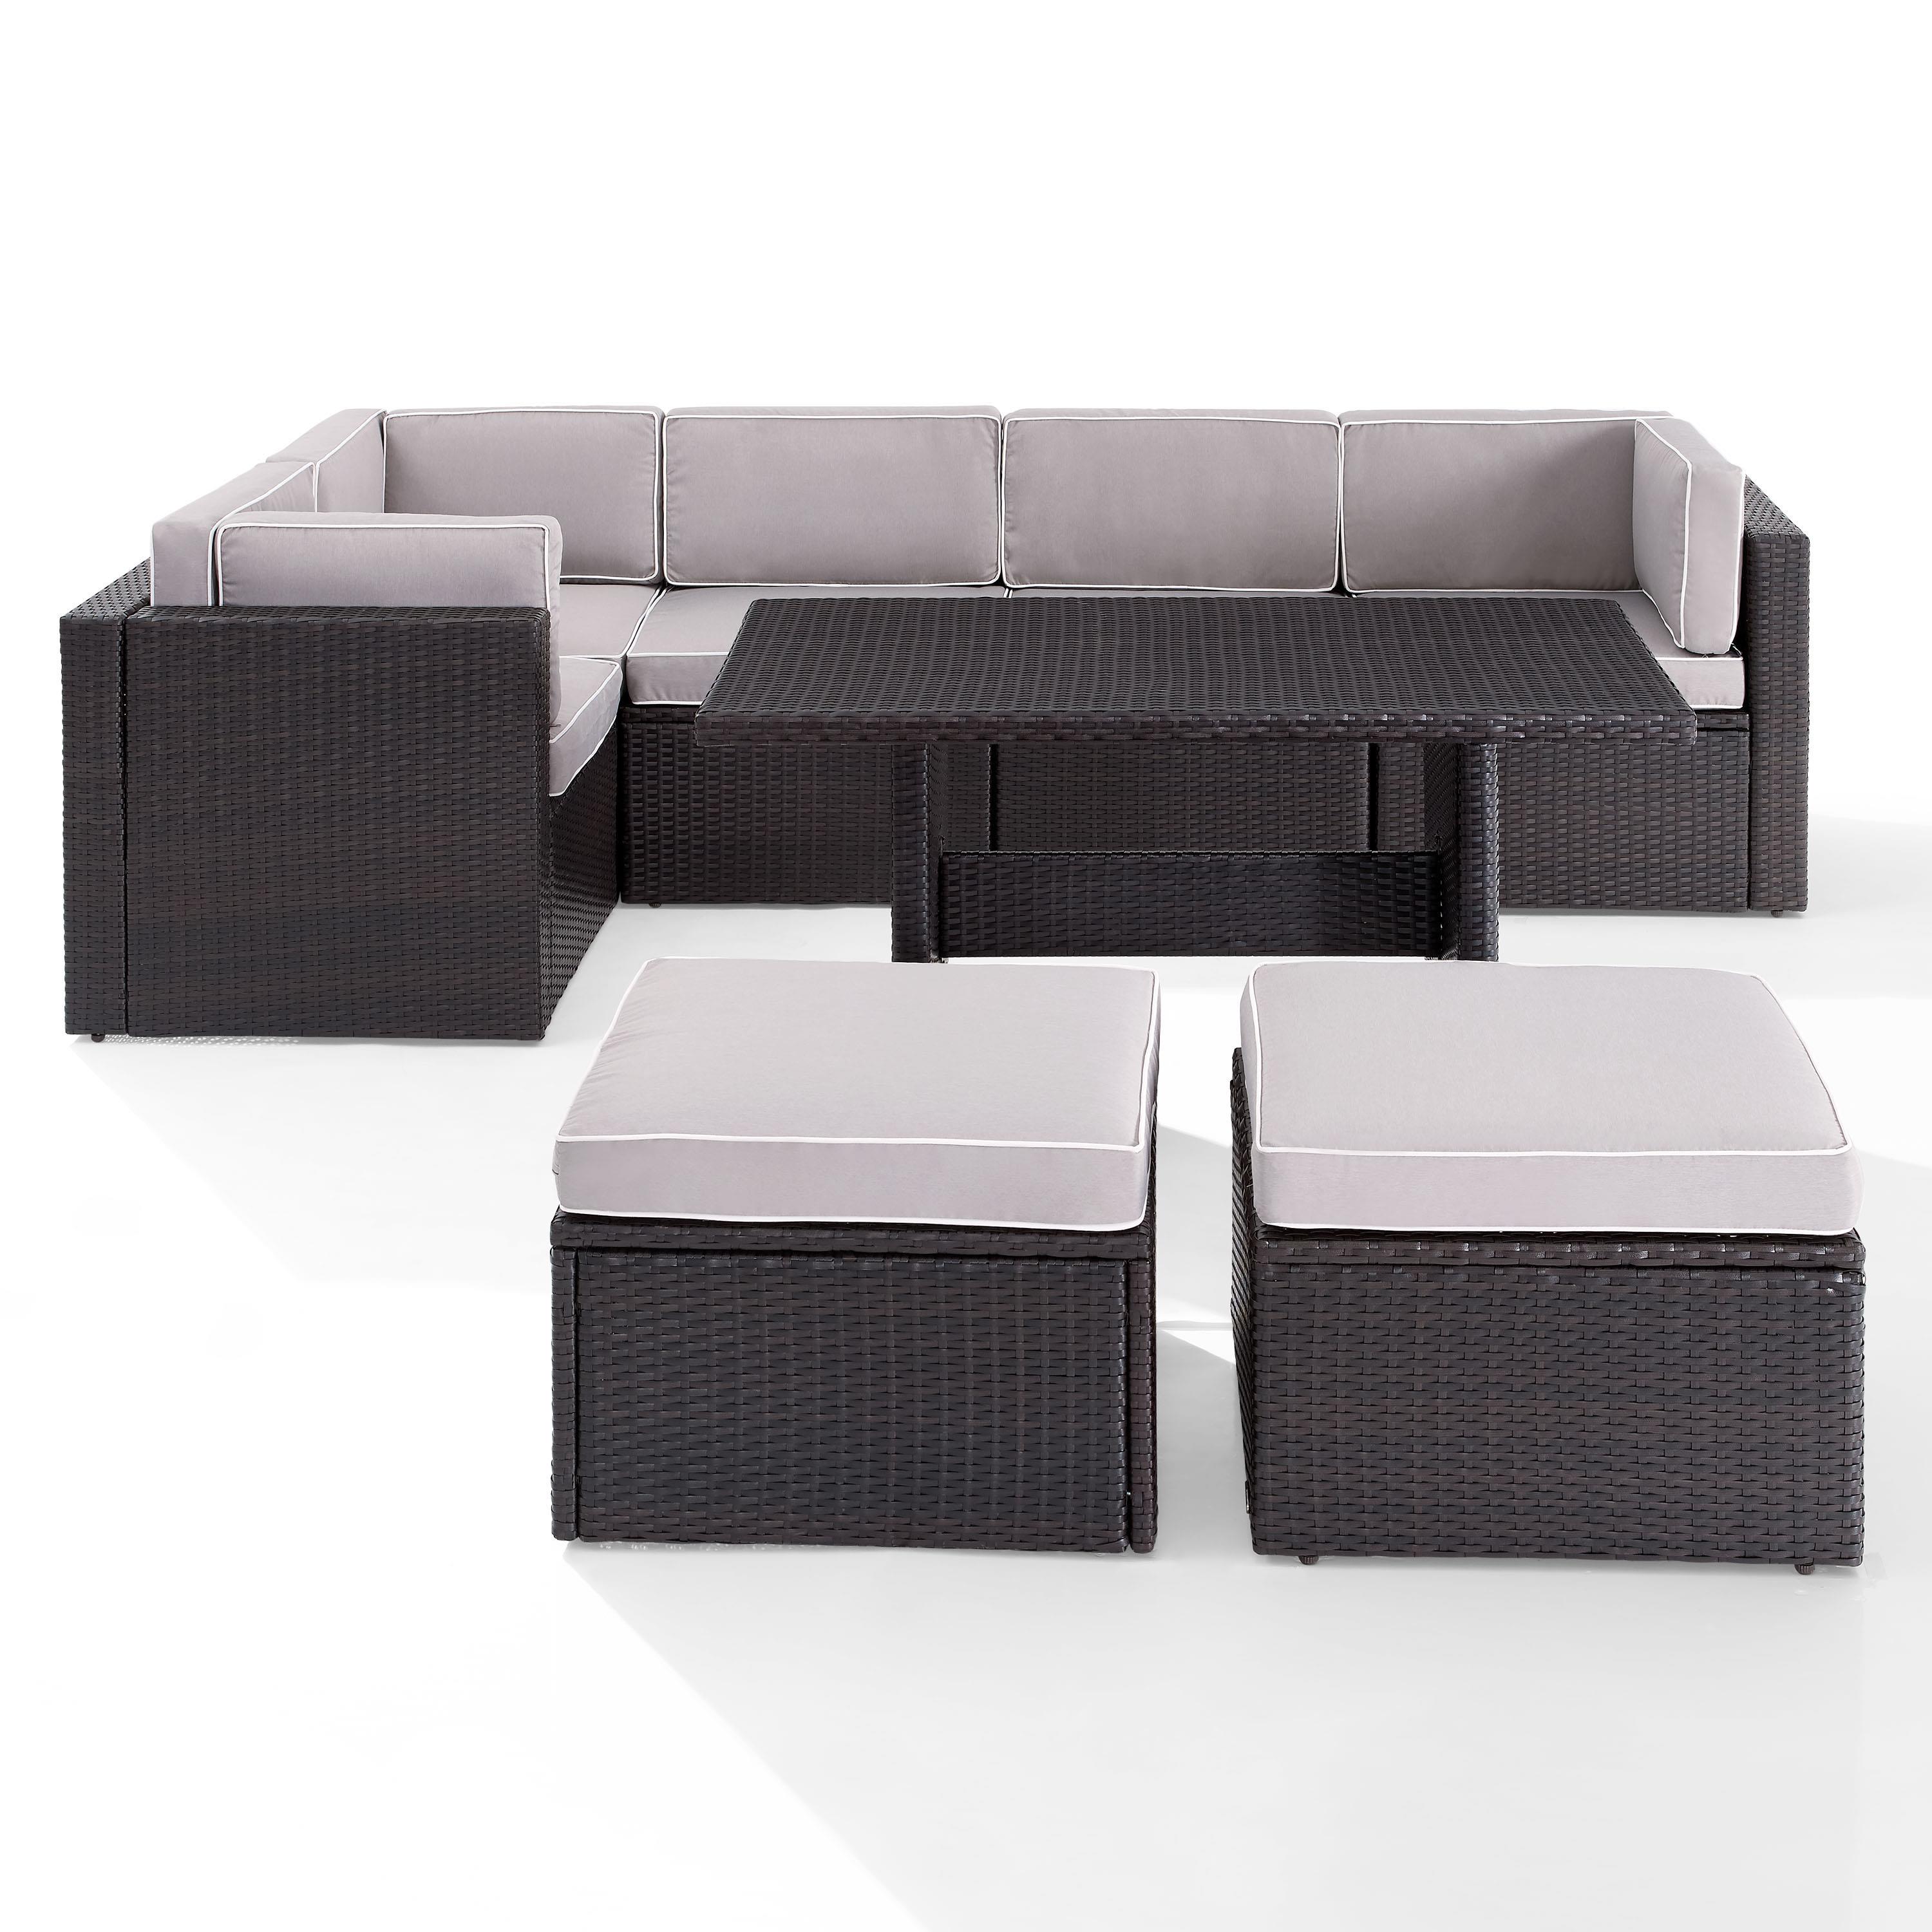 Crosley Palm Harbor 8Pc Outdoor Wicker Sectional Set- 3 Corner Chairs, 2 Center Chairs, 2 Ottomans, Cocktail Table - image 2 of 10